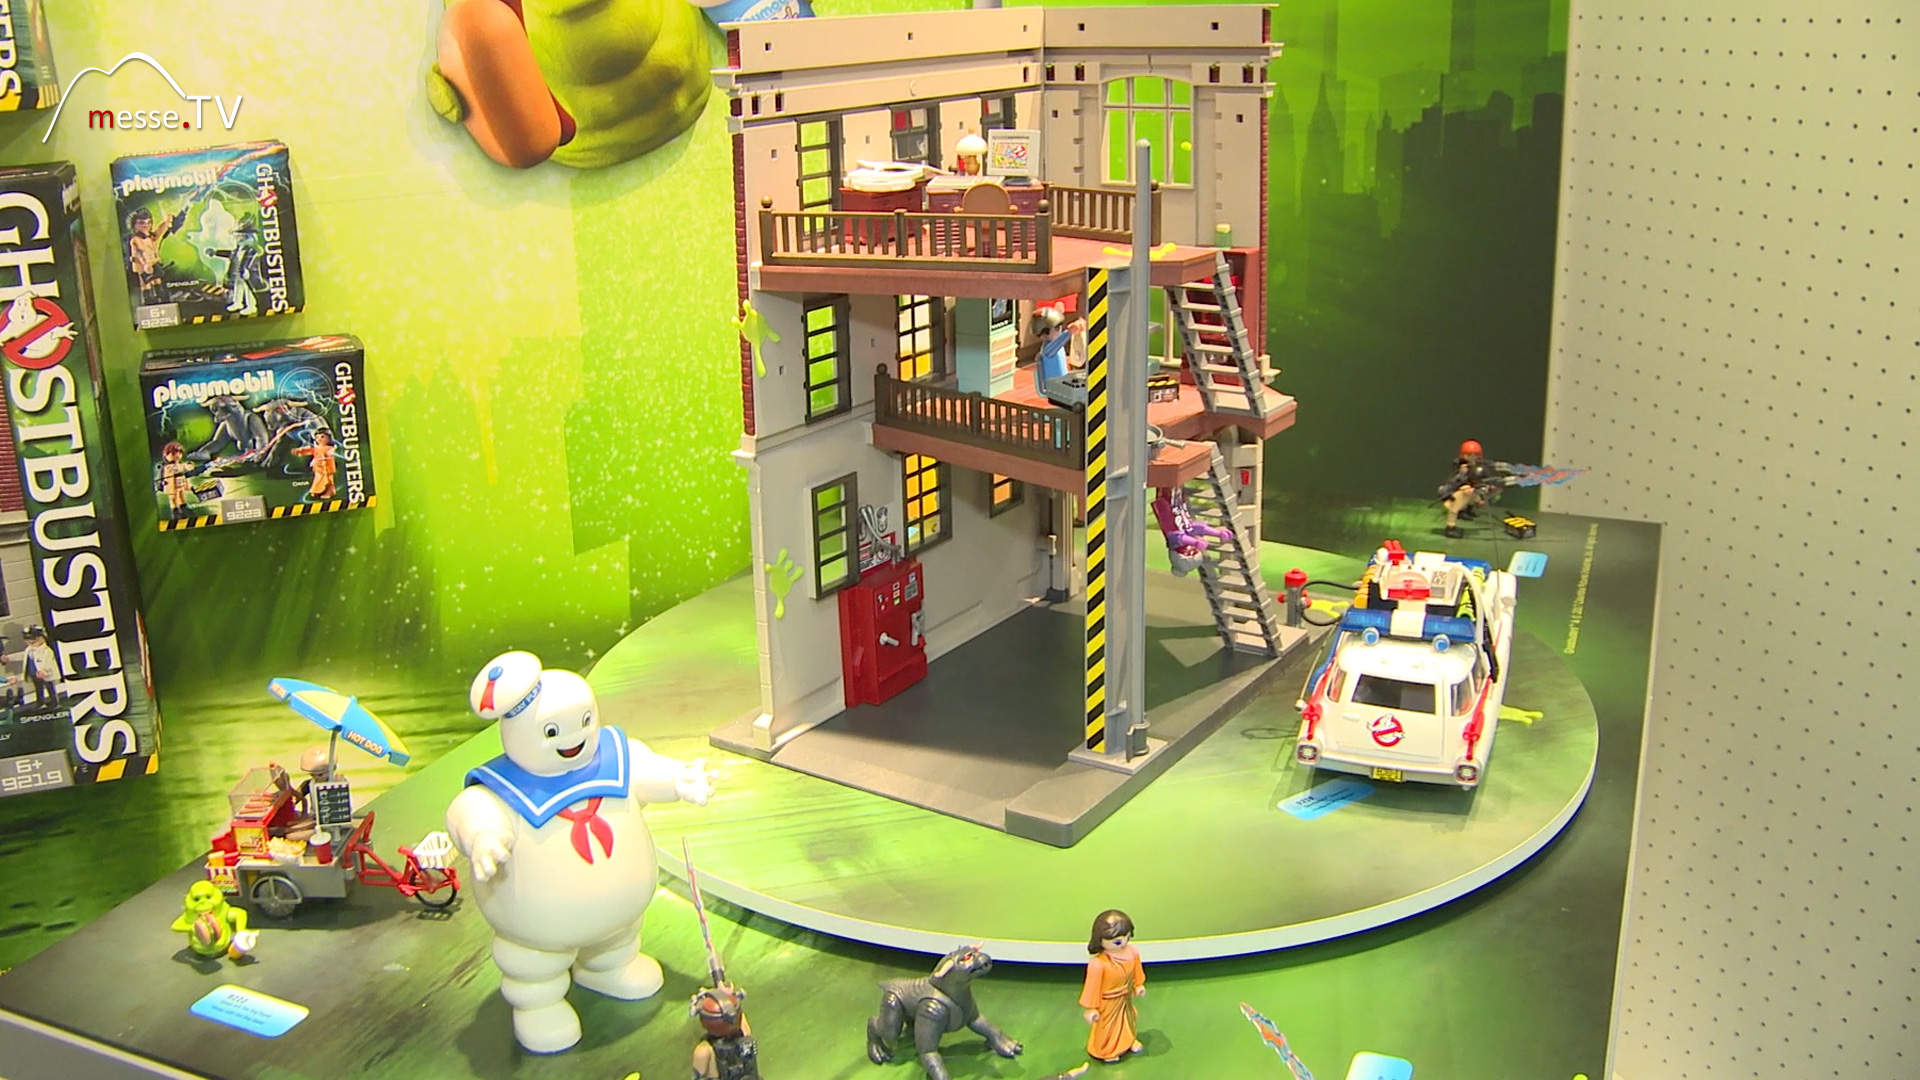 Ghostbusters Playmobil play world